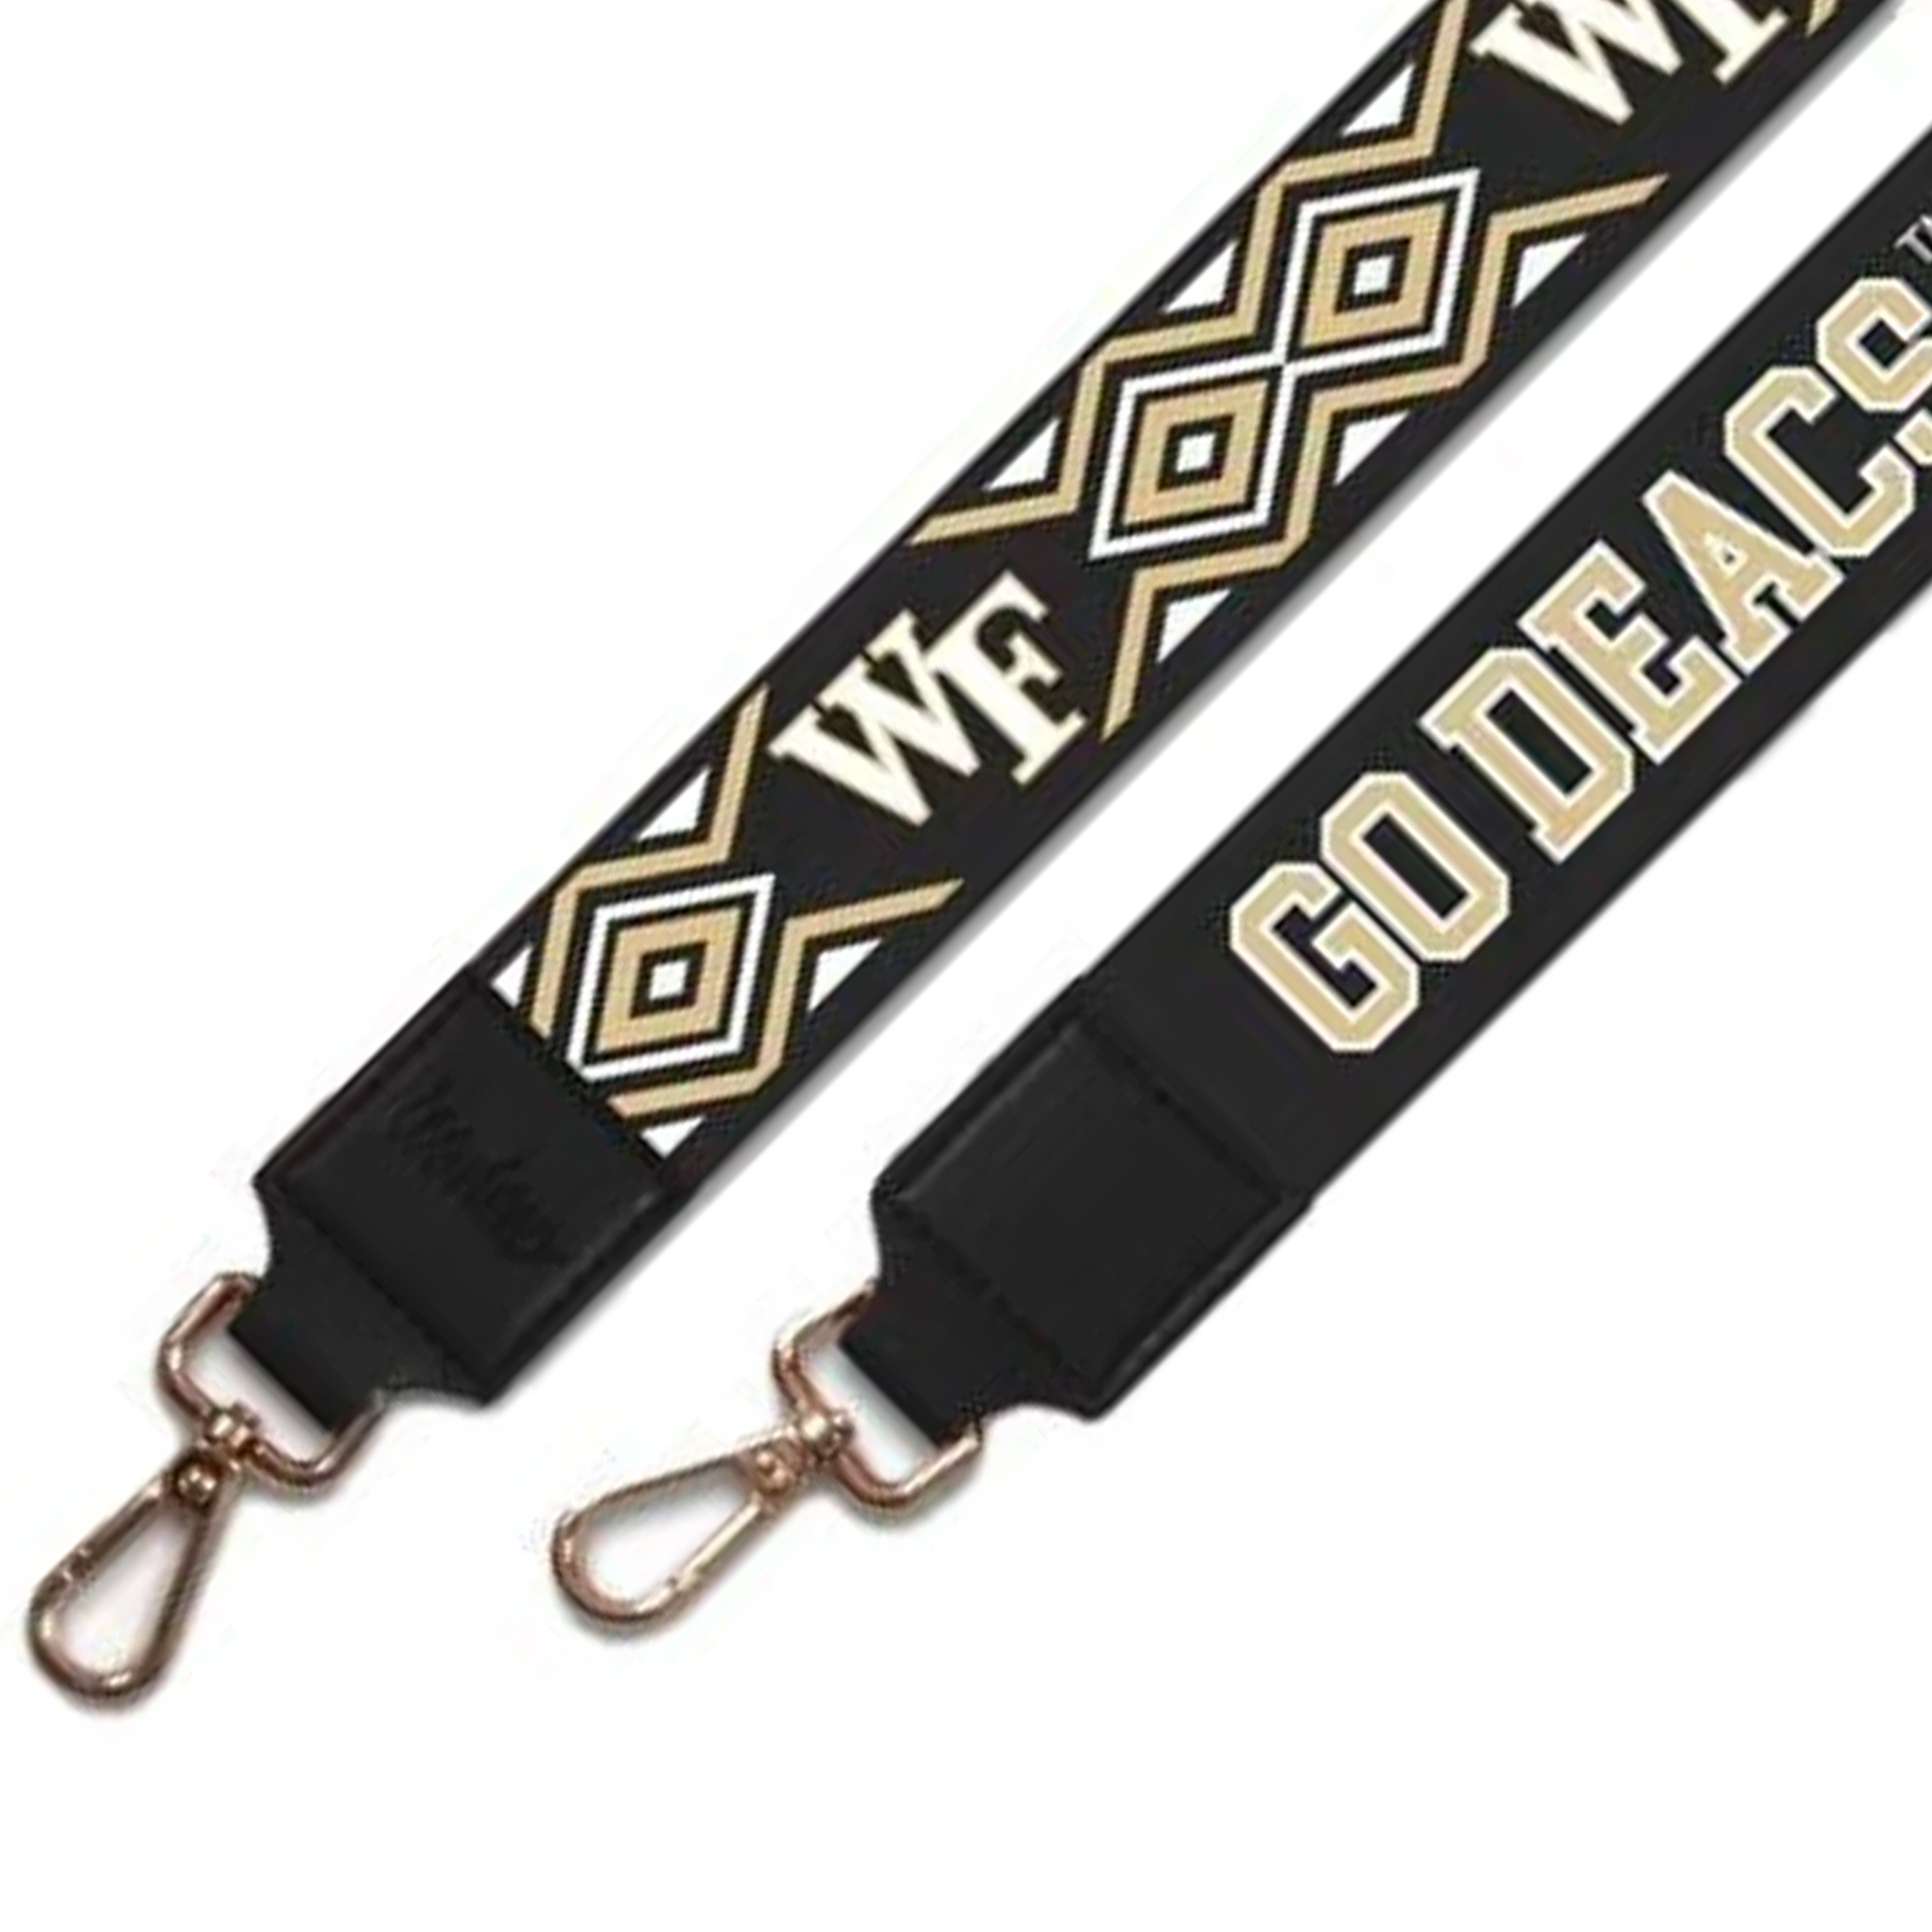 WAKE FOREST 2" - Officially Licensed - Ikat Design